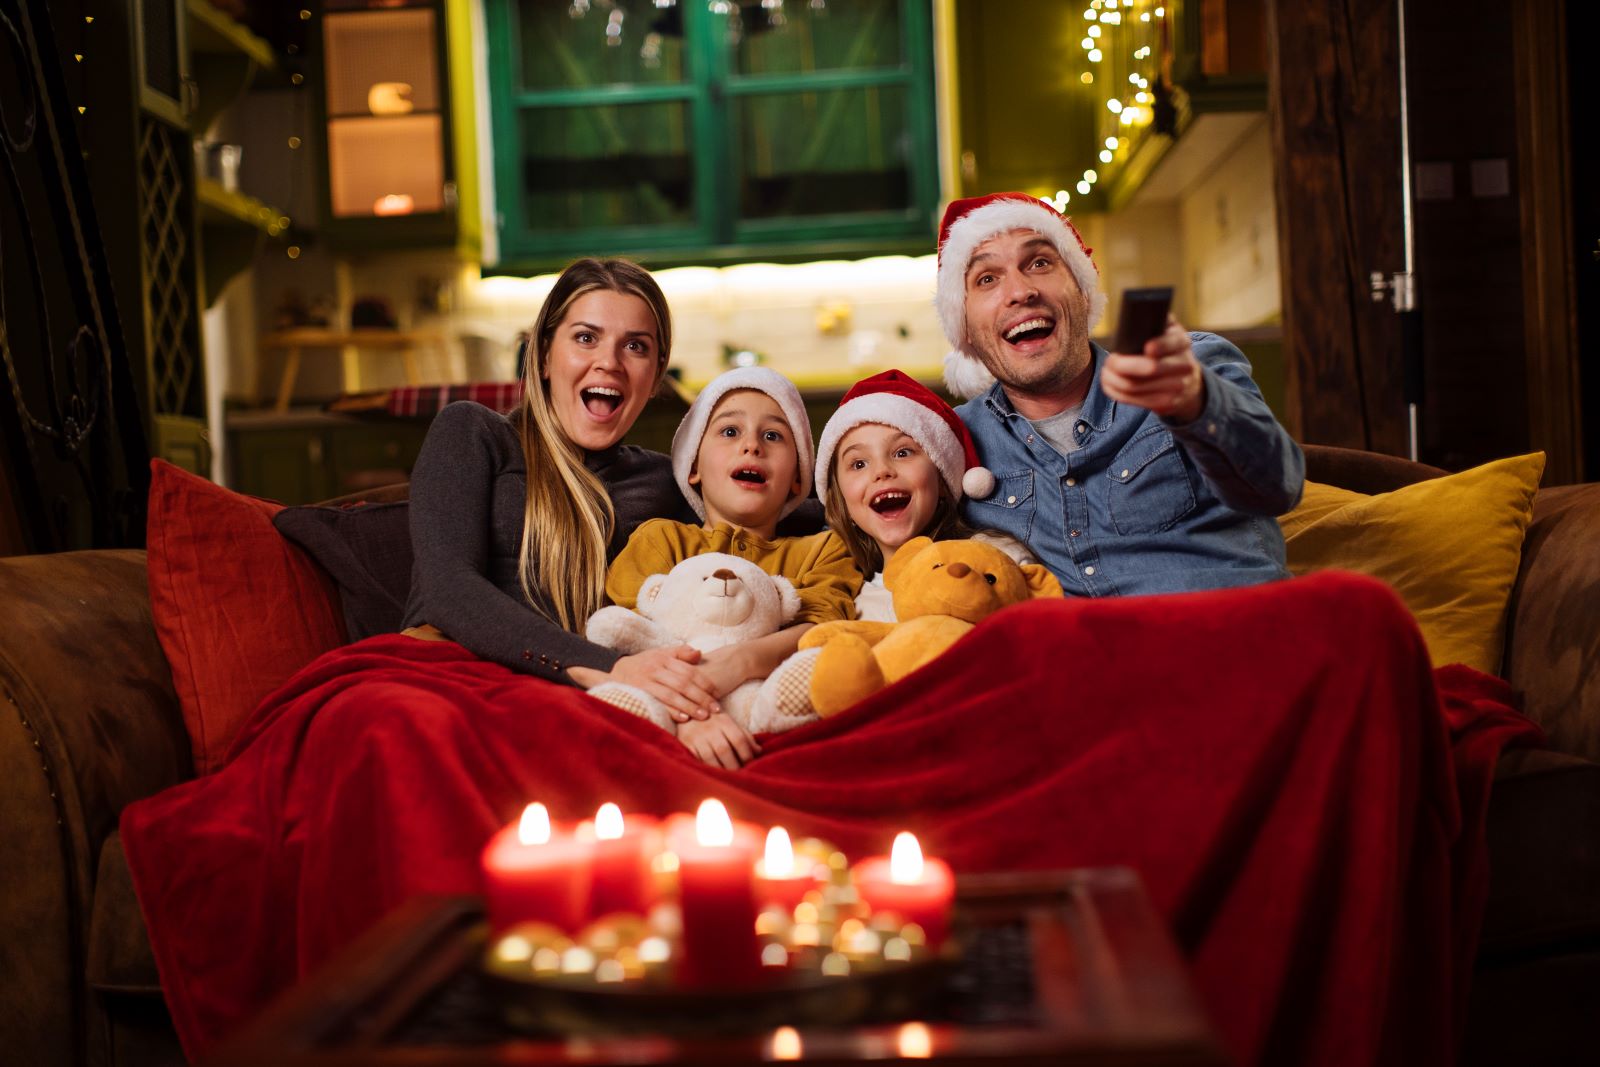 Do You Have the Holiday Spirit? How (and Why) the Holidays Impact Our Mood